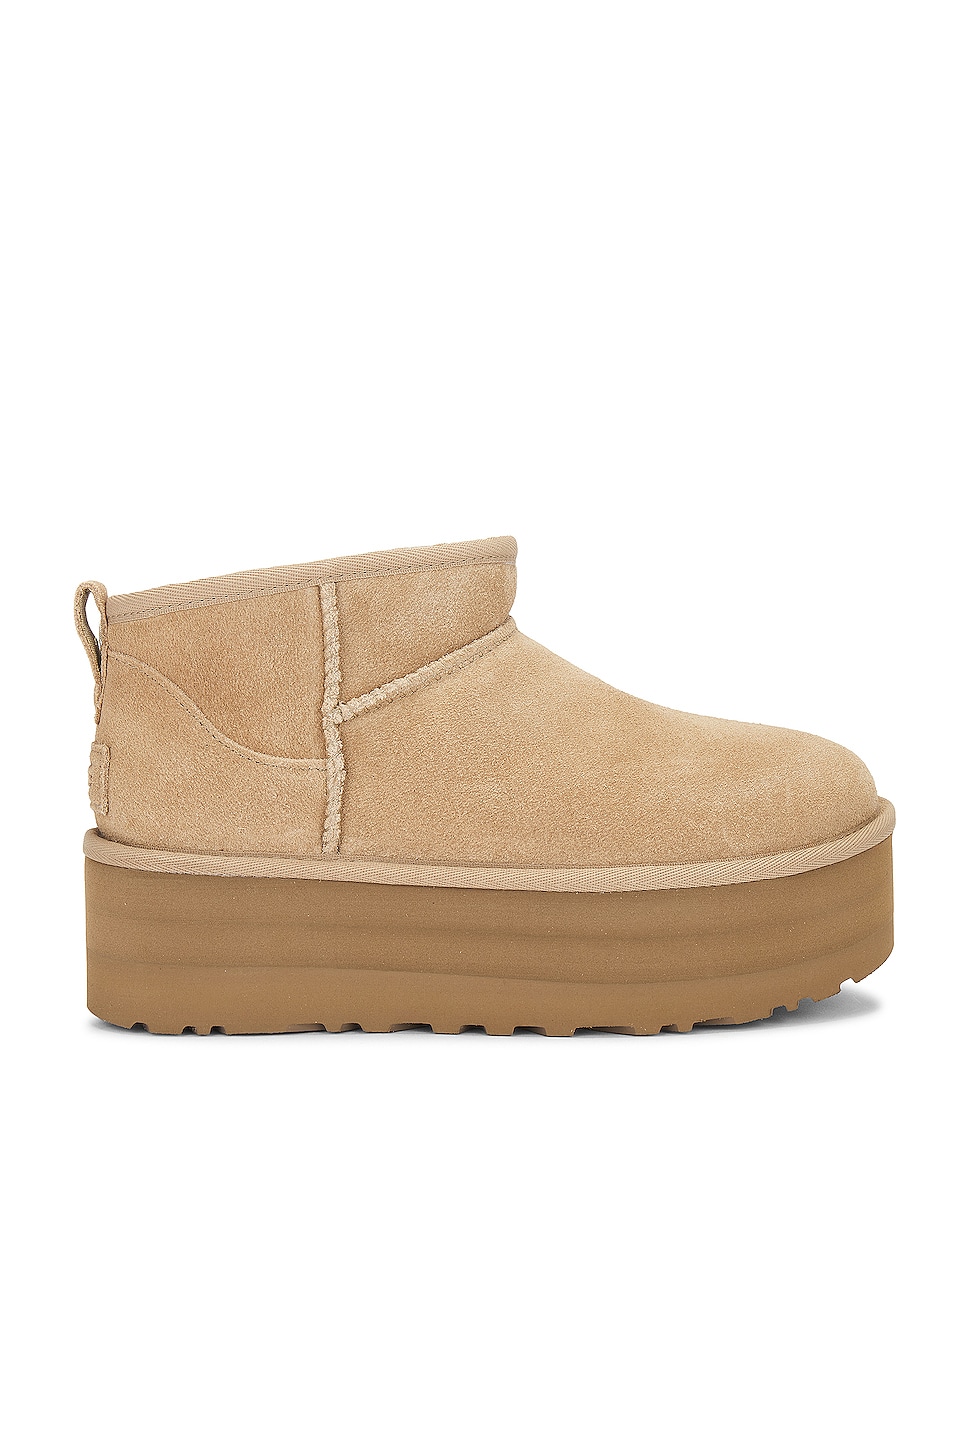 Image 1 of UGG Classic Ultra Mini Platform Boot in Sand